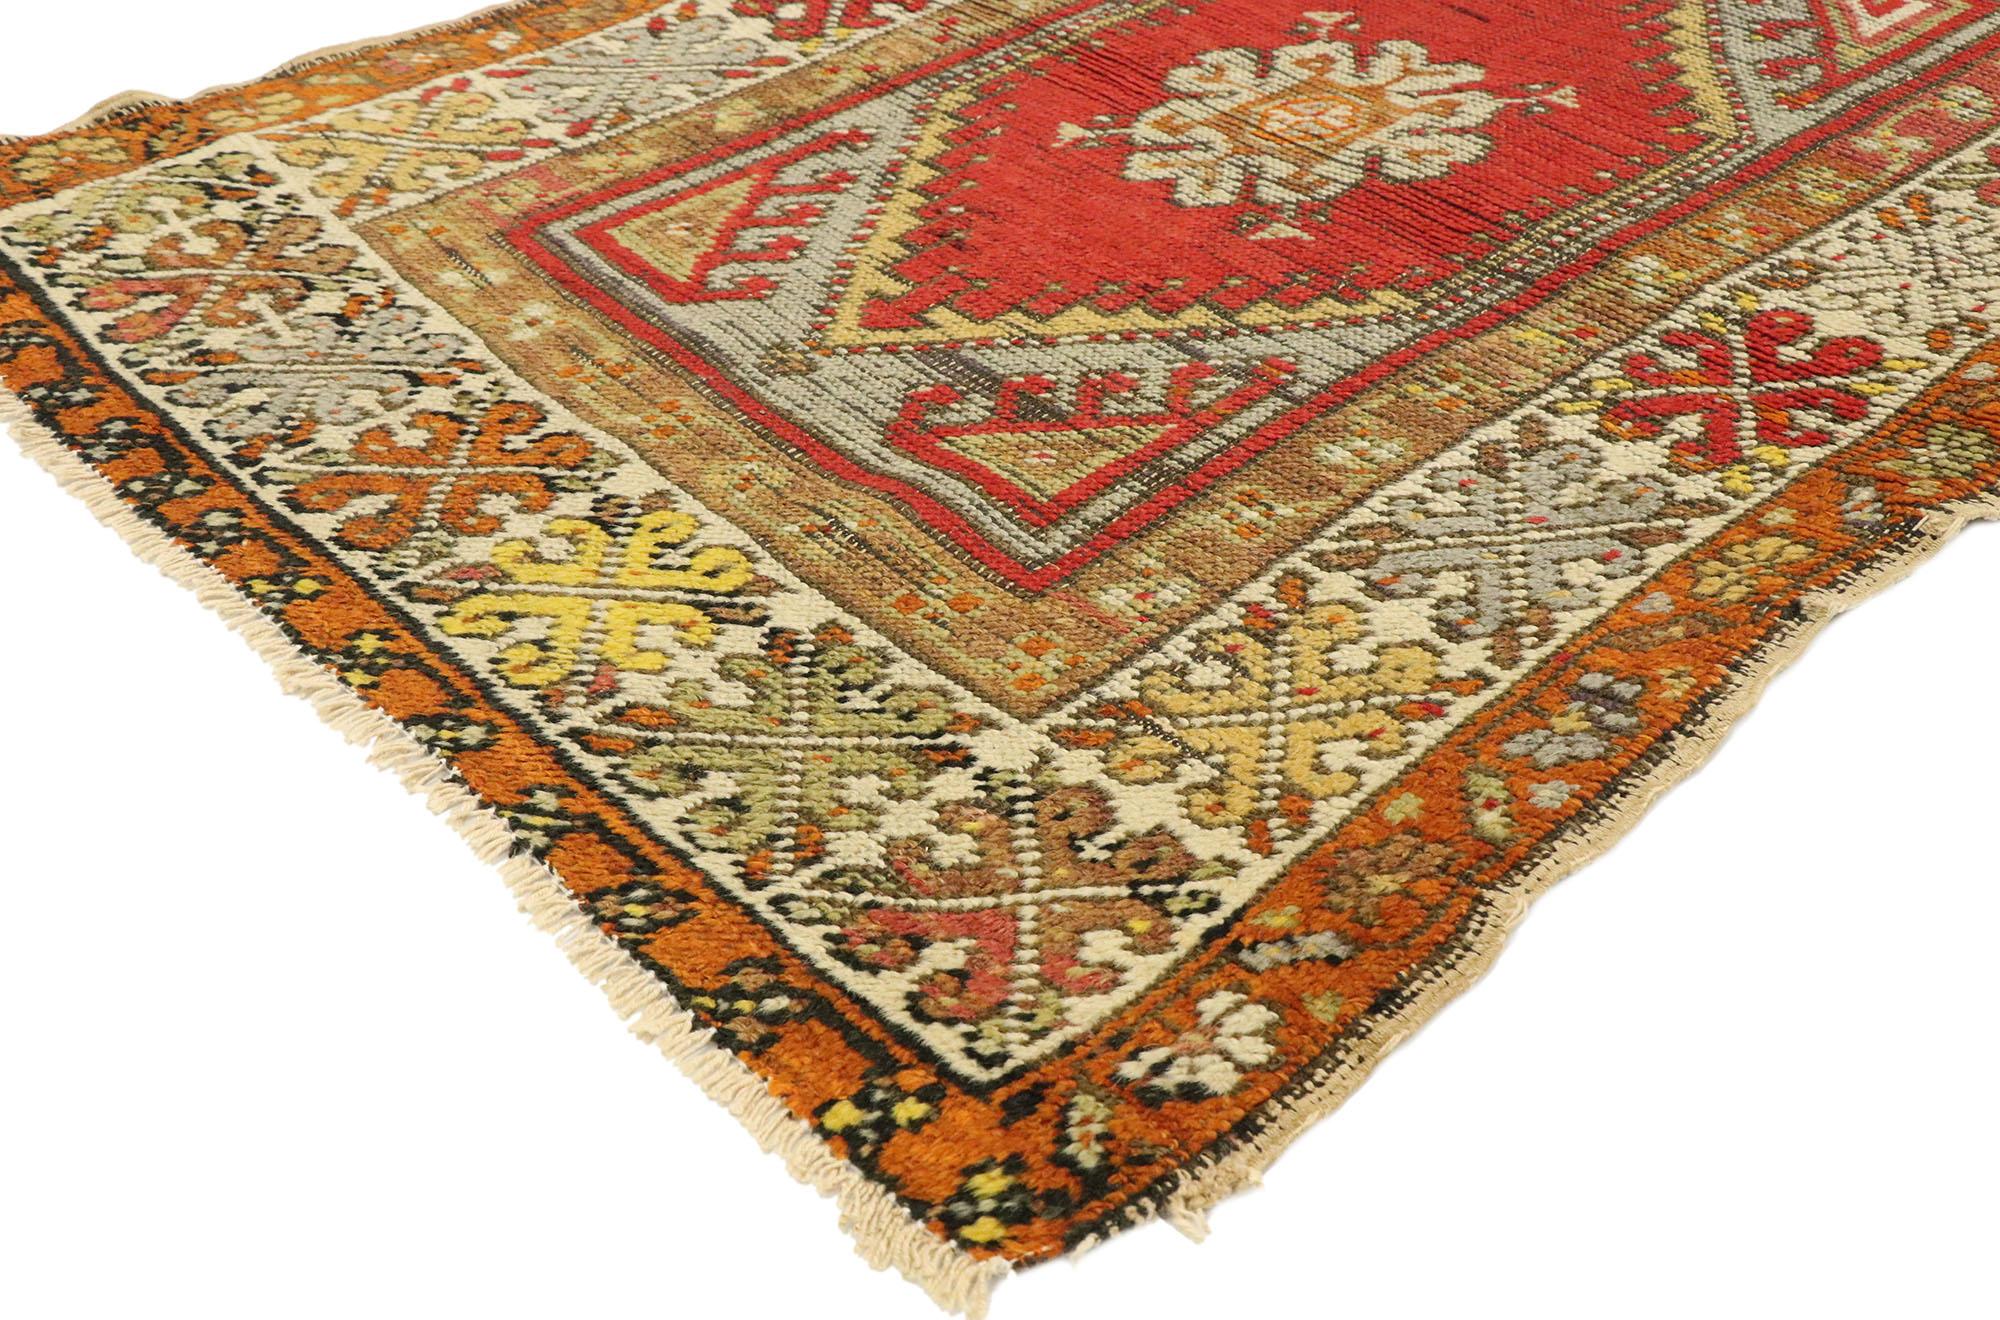 73622 distressed vintage Turkish Oushak rug with Rustic Northwestern style, colorful rug for kitchen, bath, foyer or entryway. This hand knotted wool distressed vintage Turkish Oushak rug features a modern rustic northwestern style. Immersed in